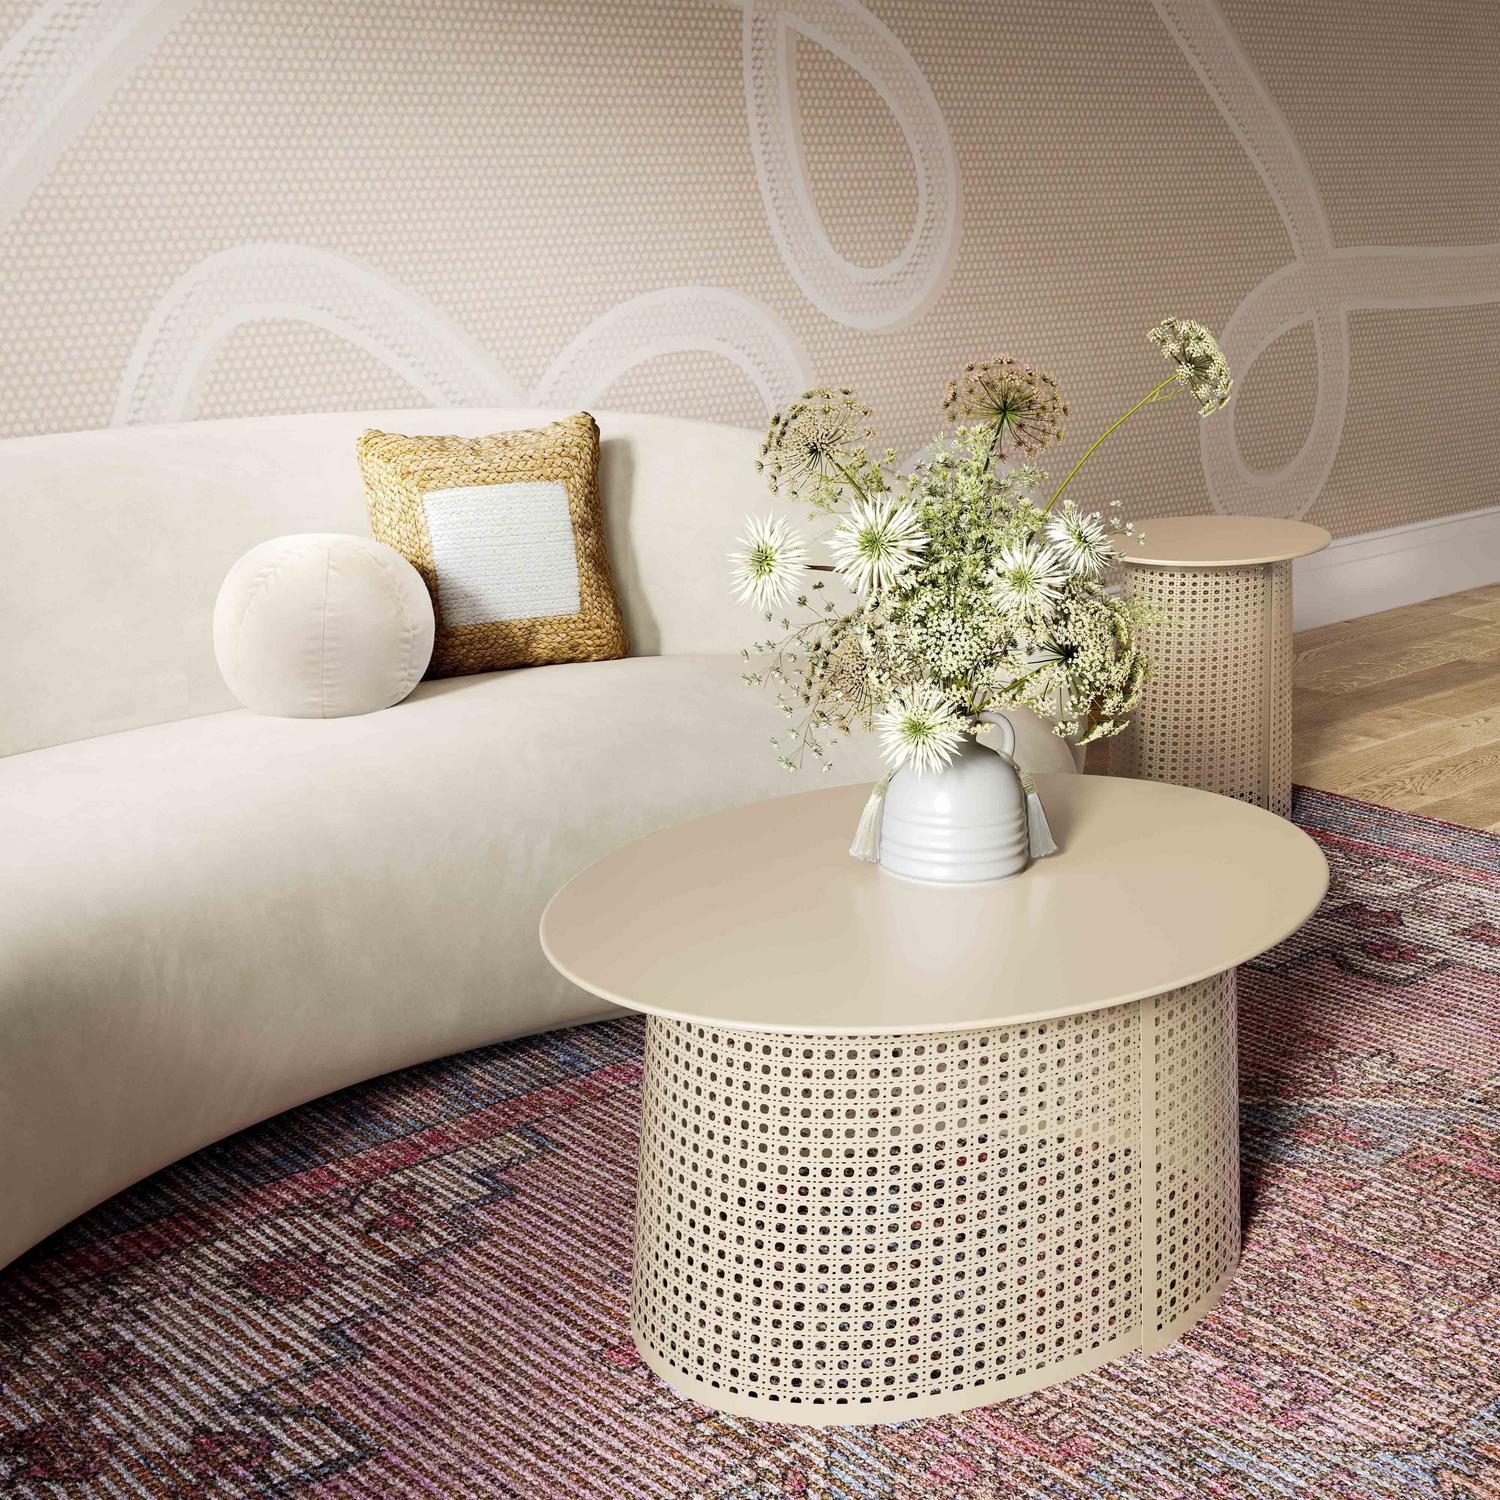 modern coffee table with storage Contemporary Design Furniture Coffee Tables Cream